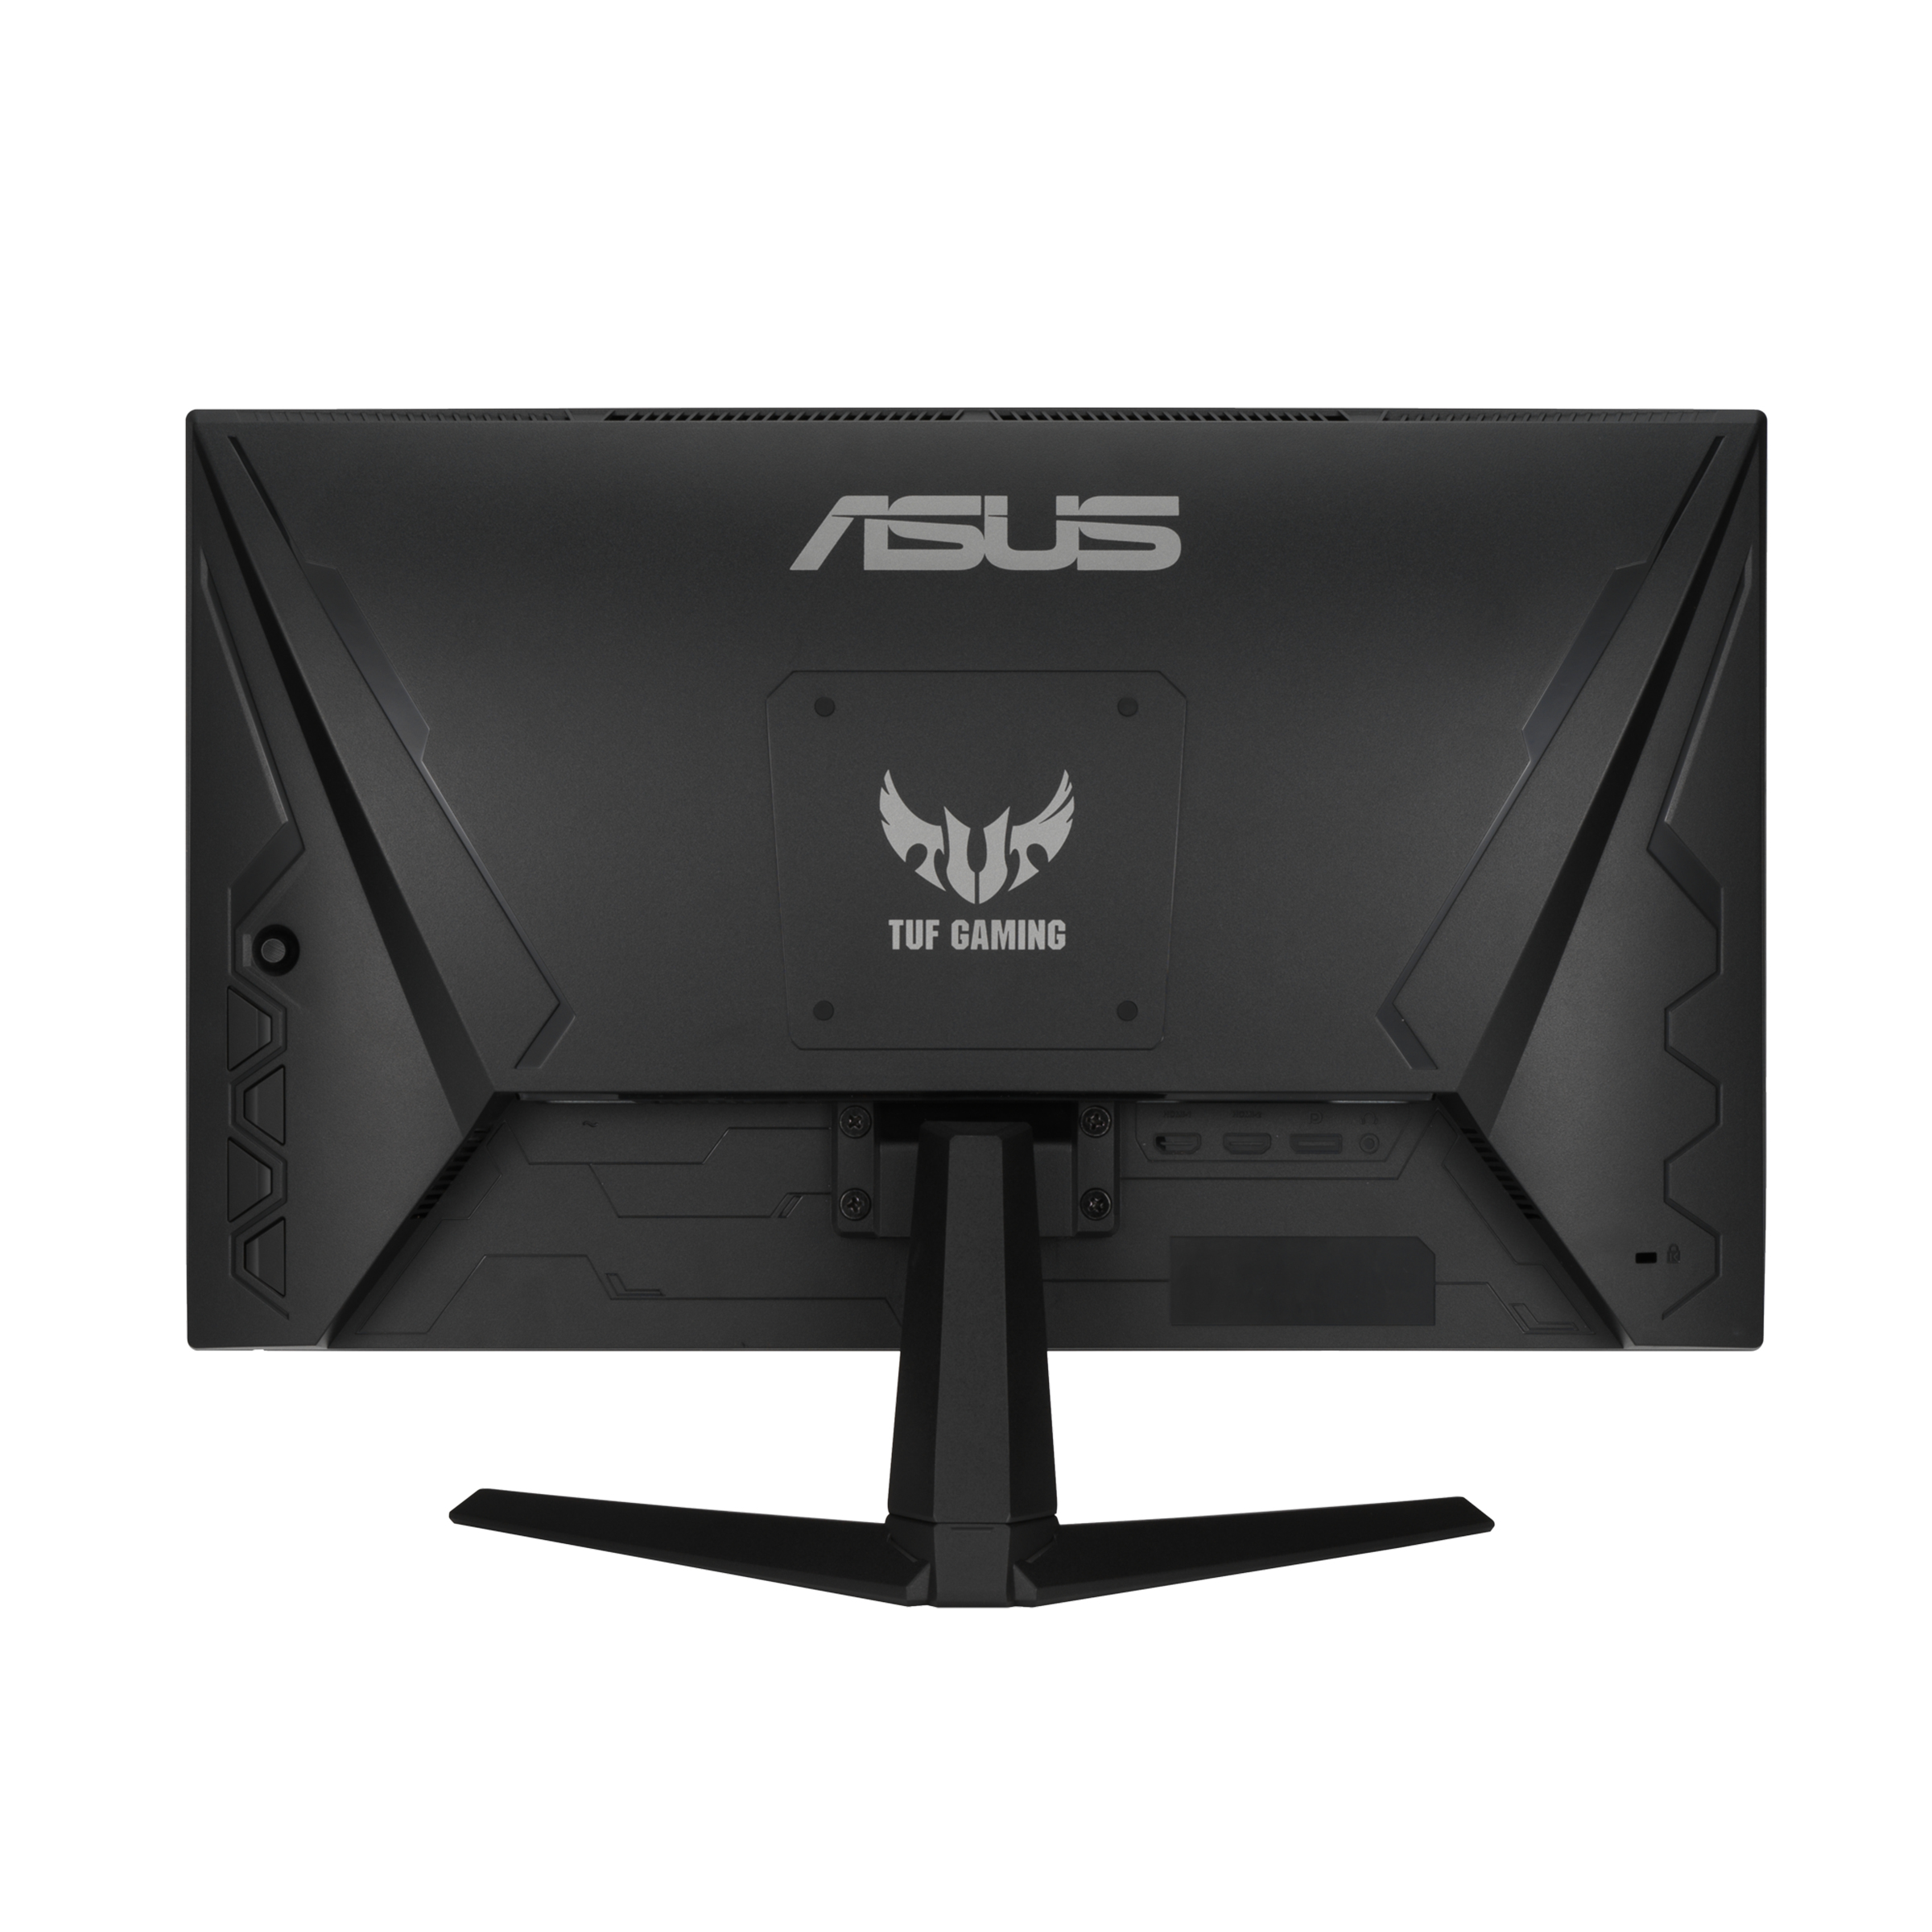 ASUS TUF Gaming Zoll Monitor 23,8 ms (1 VG249Q1A Full-HD 165 Hz) Gaming Reaktionszeit